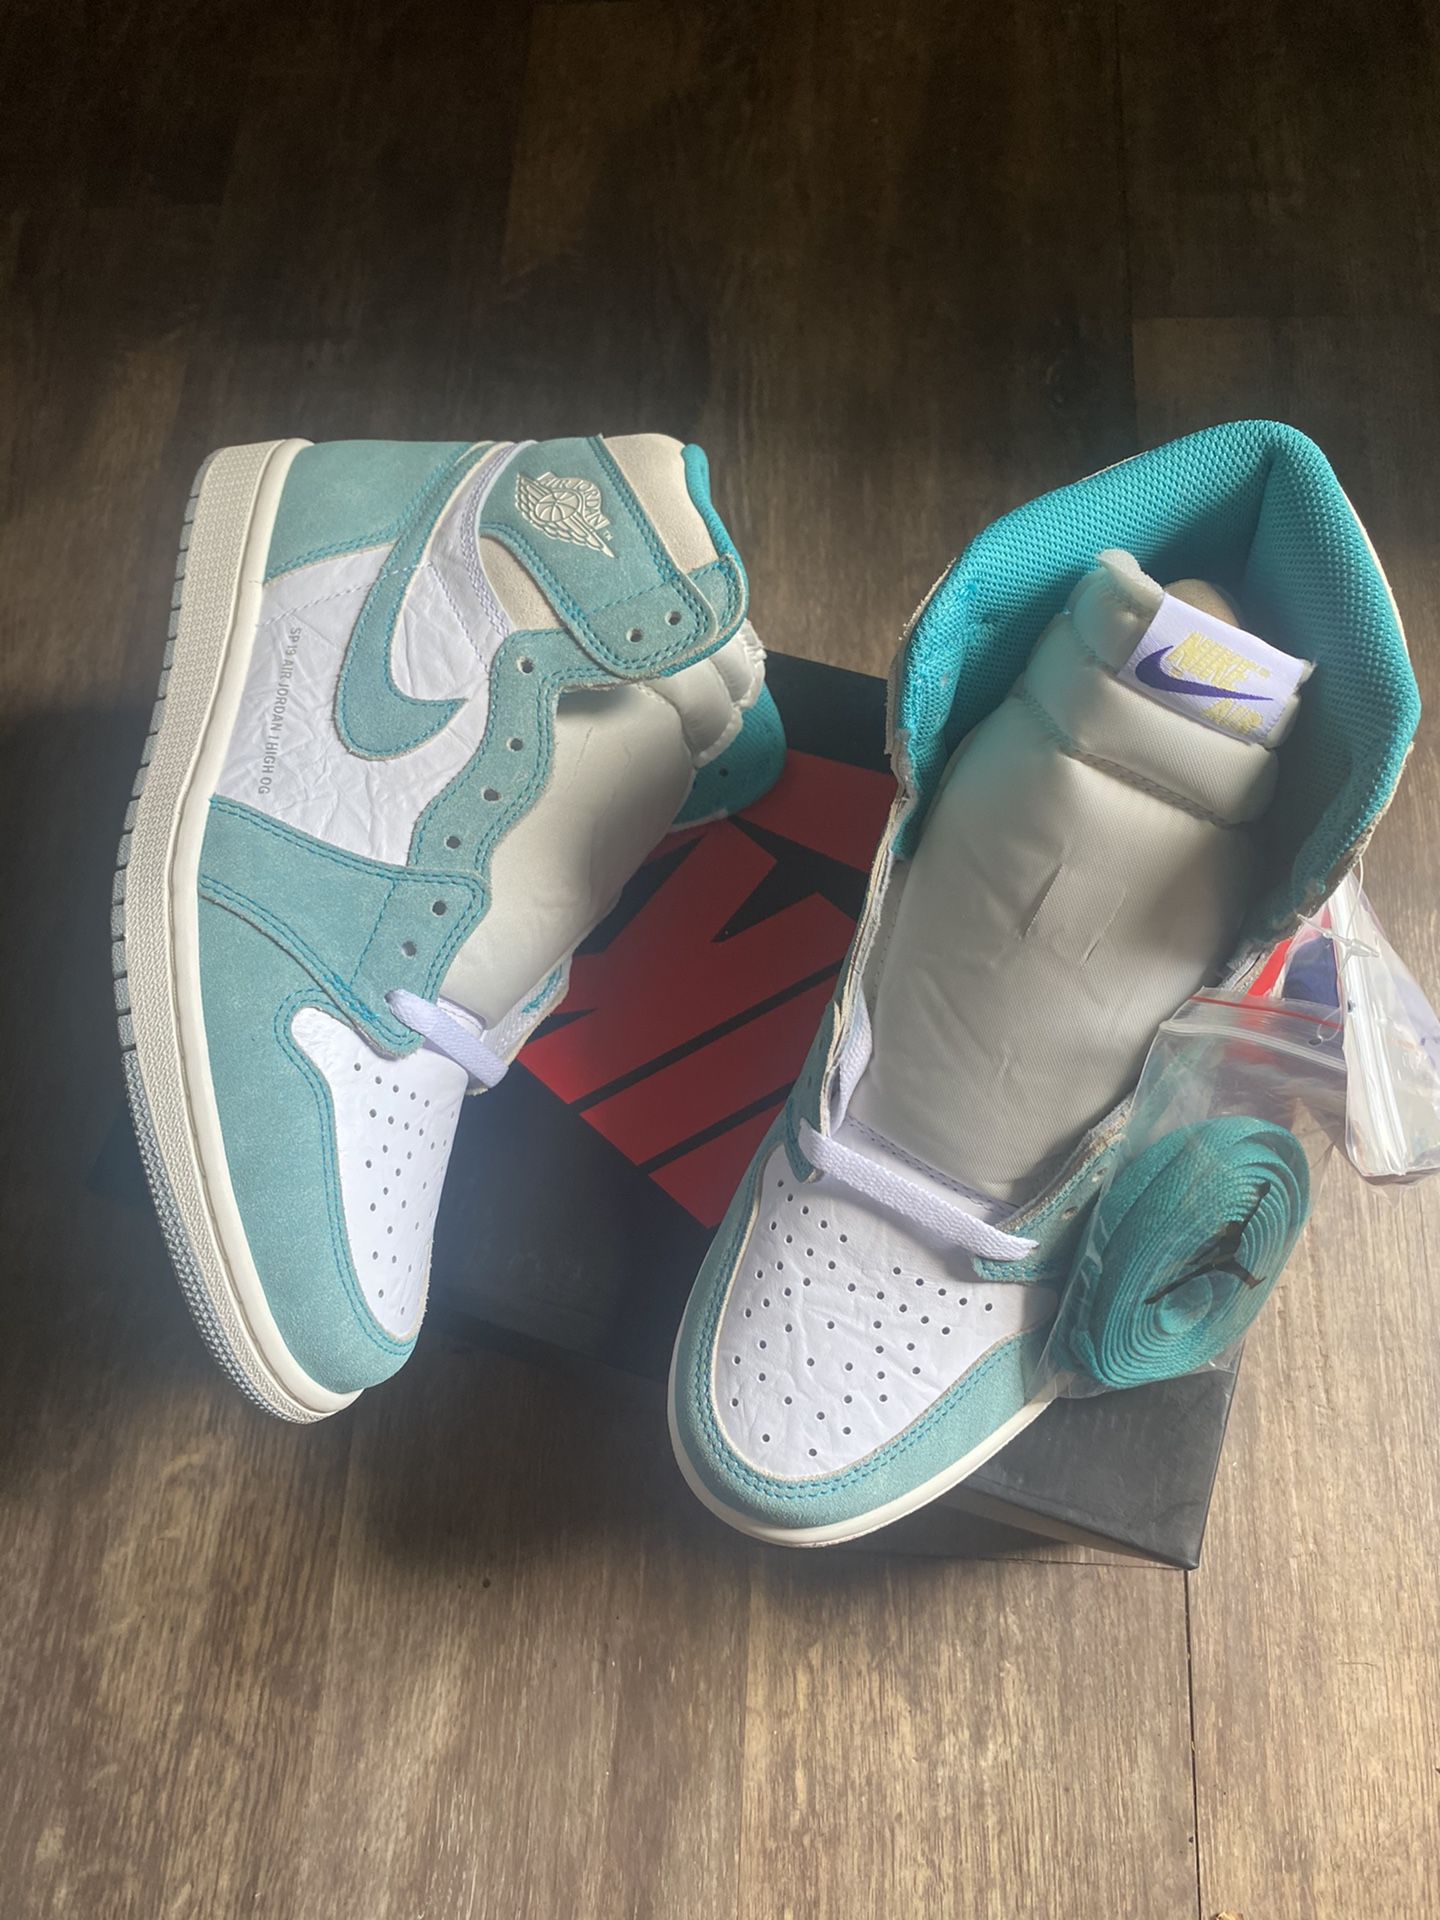 Jordan 1 Turbo Green size 10.5 (purchased from NikeSNKRS)